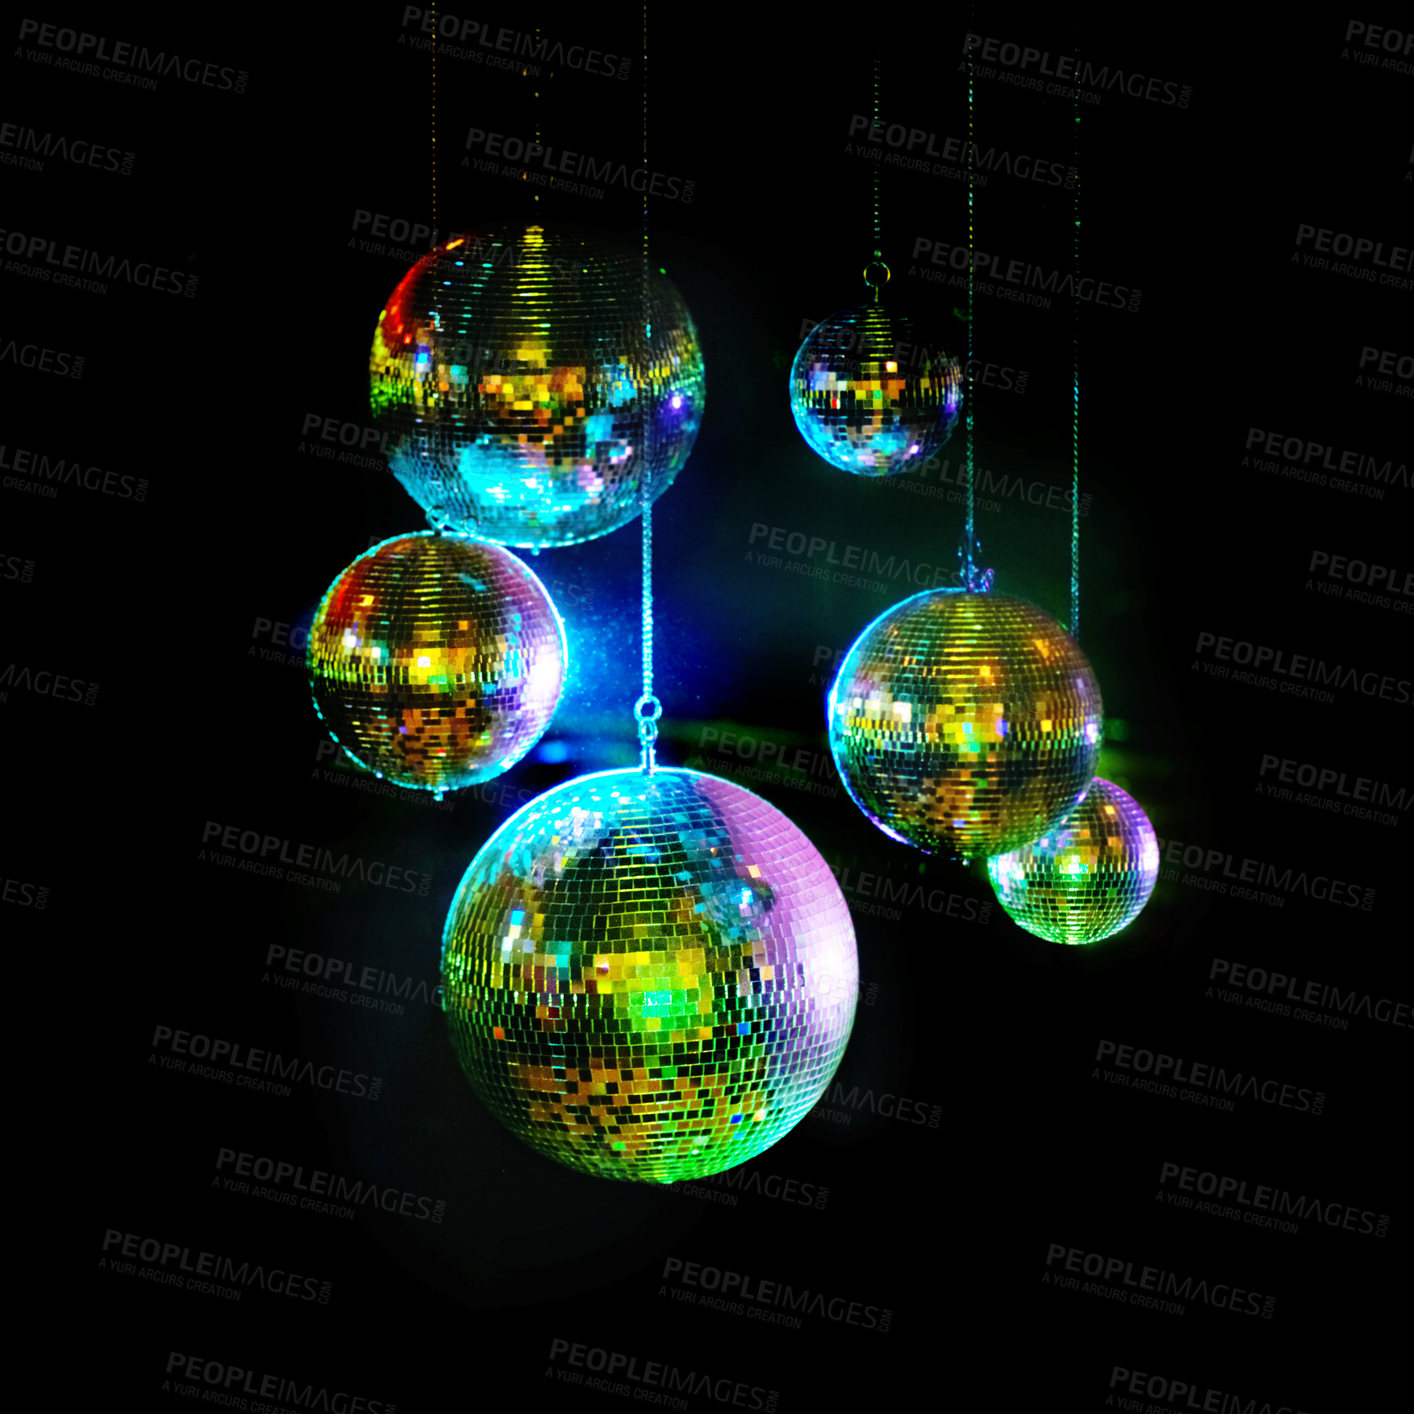 Buy stock photo Awesome image of kaleidoscopic-looking disco balls hanging against a black background